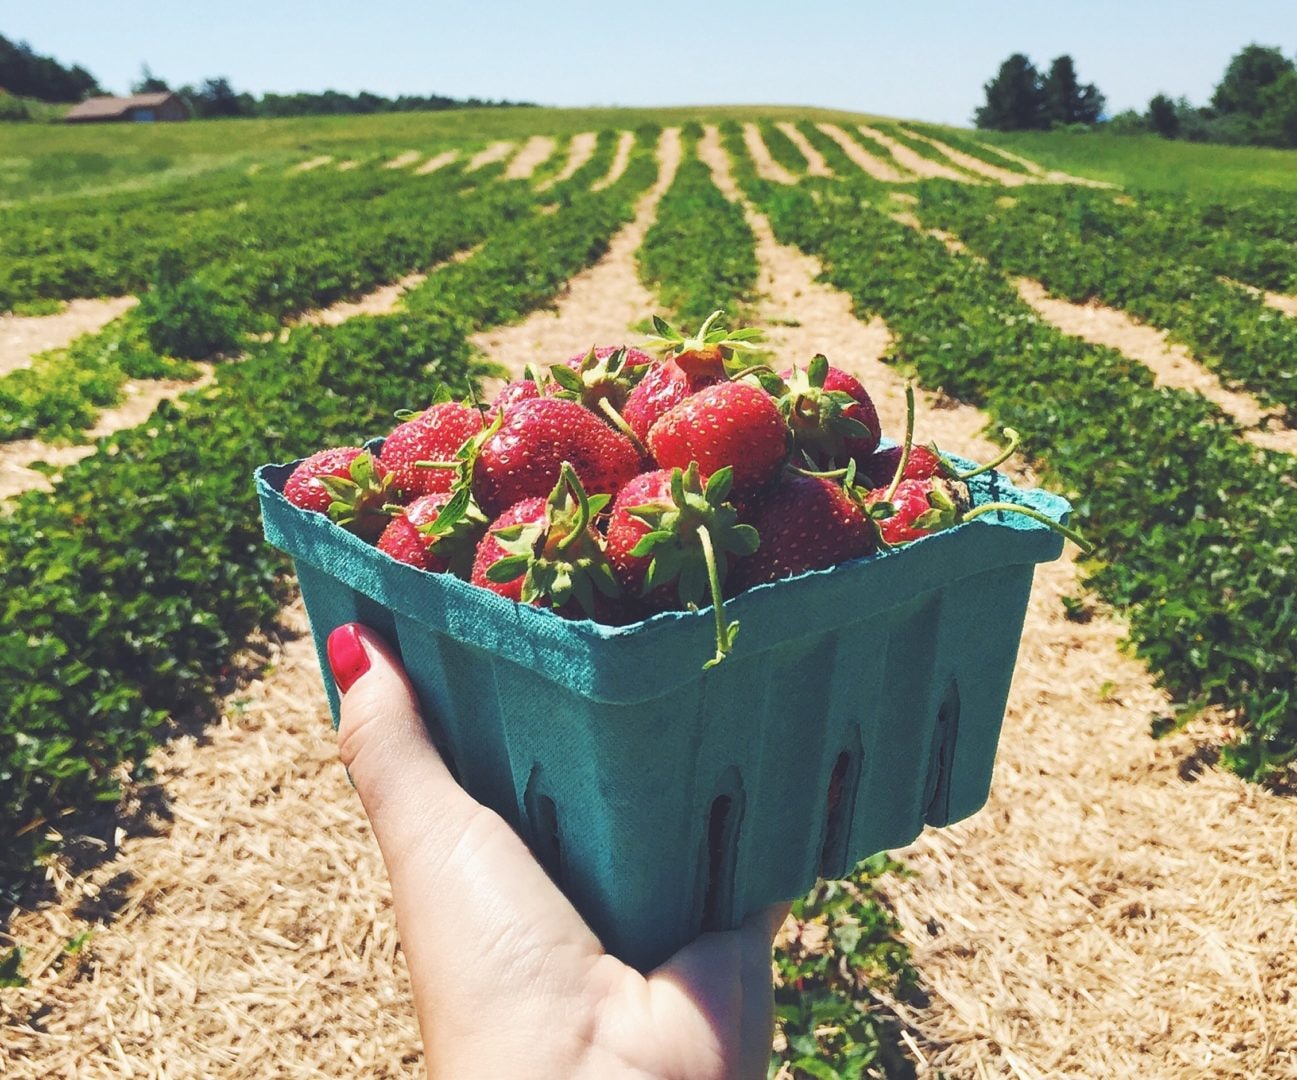 The Best 5 Farms for Strawberry Picking Near Chicago